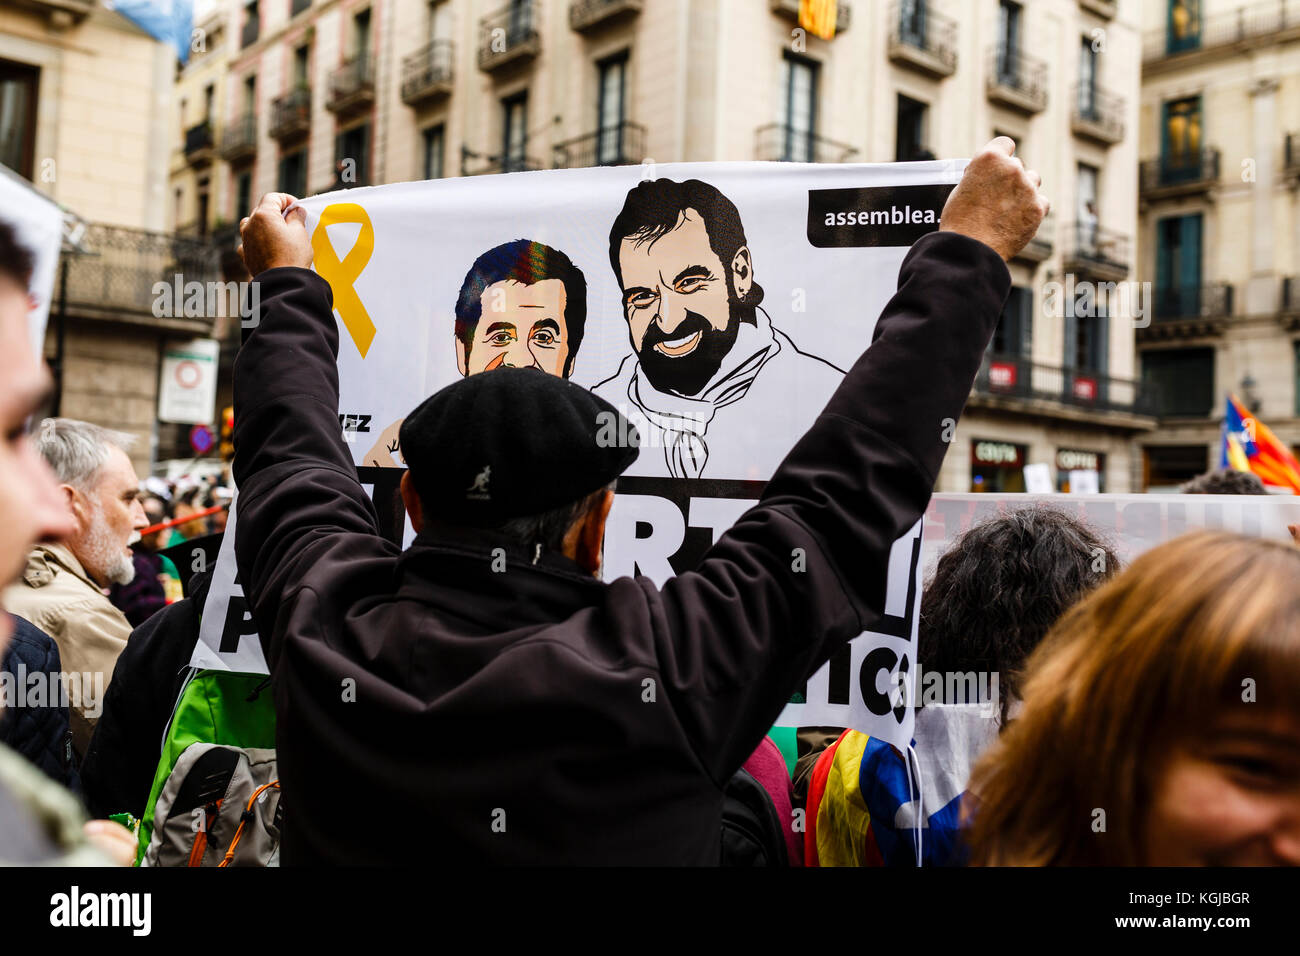 November 8, 2017 - Barcelona, Barcelona, Spain - Protesters calling for freedom for political prisoners during the concentration in Sant Jaume's Square, Barcelona Credit: Joan Gosa Badia/Alamy Stock Photo